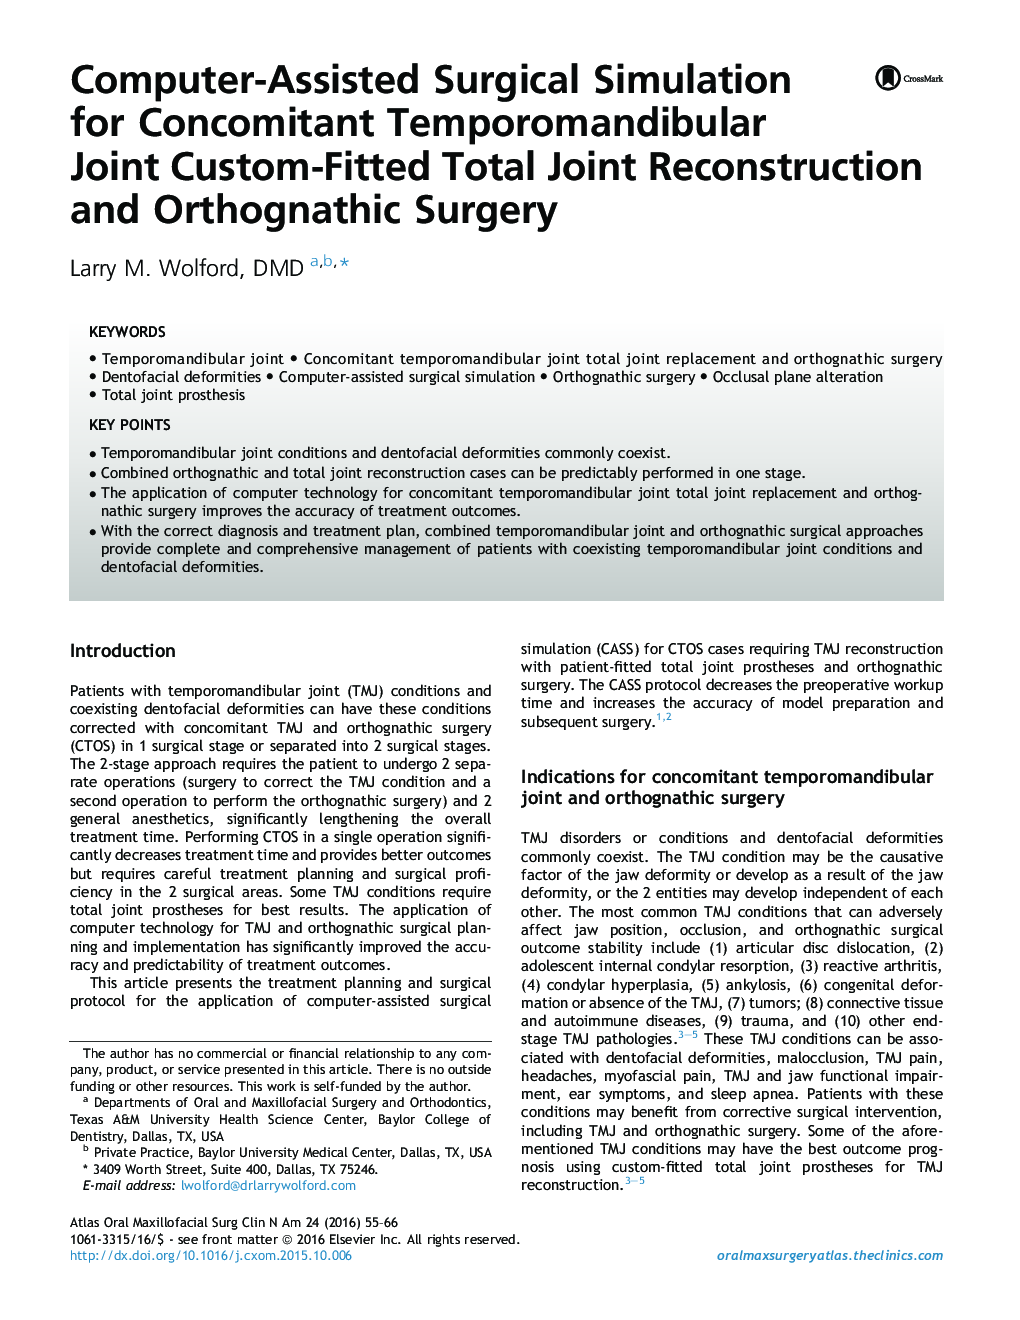 Computer-Assisted Surgical Simulation for Concomitant Temporomandibular Joint Custom-Fitted Total Joint Reconstruction and Orthognathic Surgery